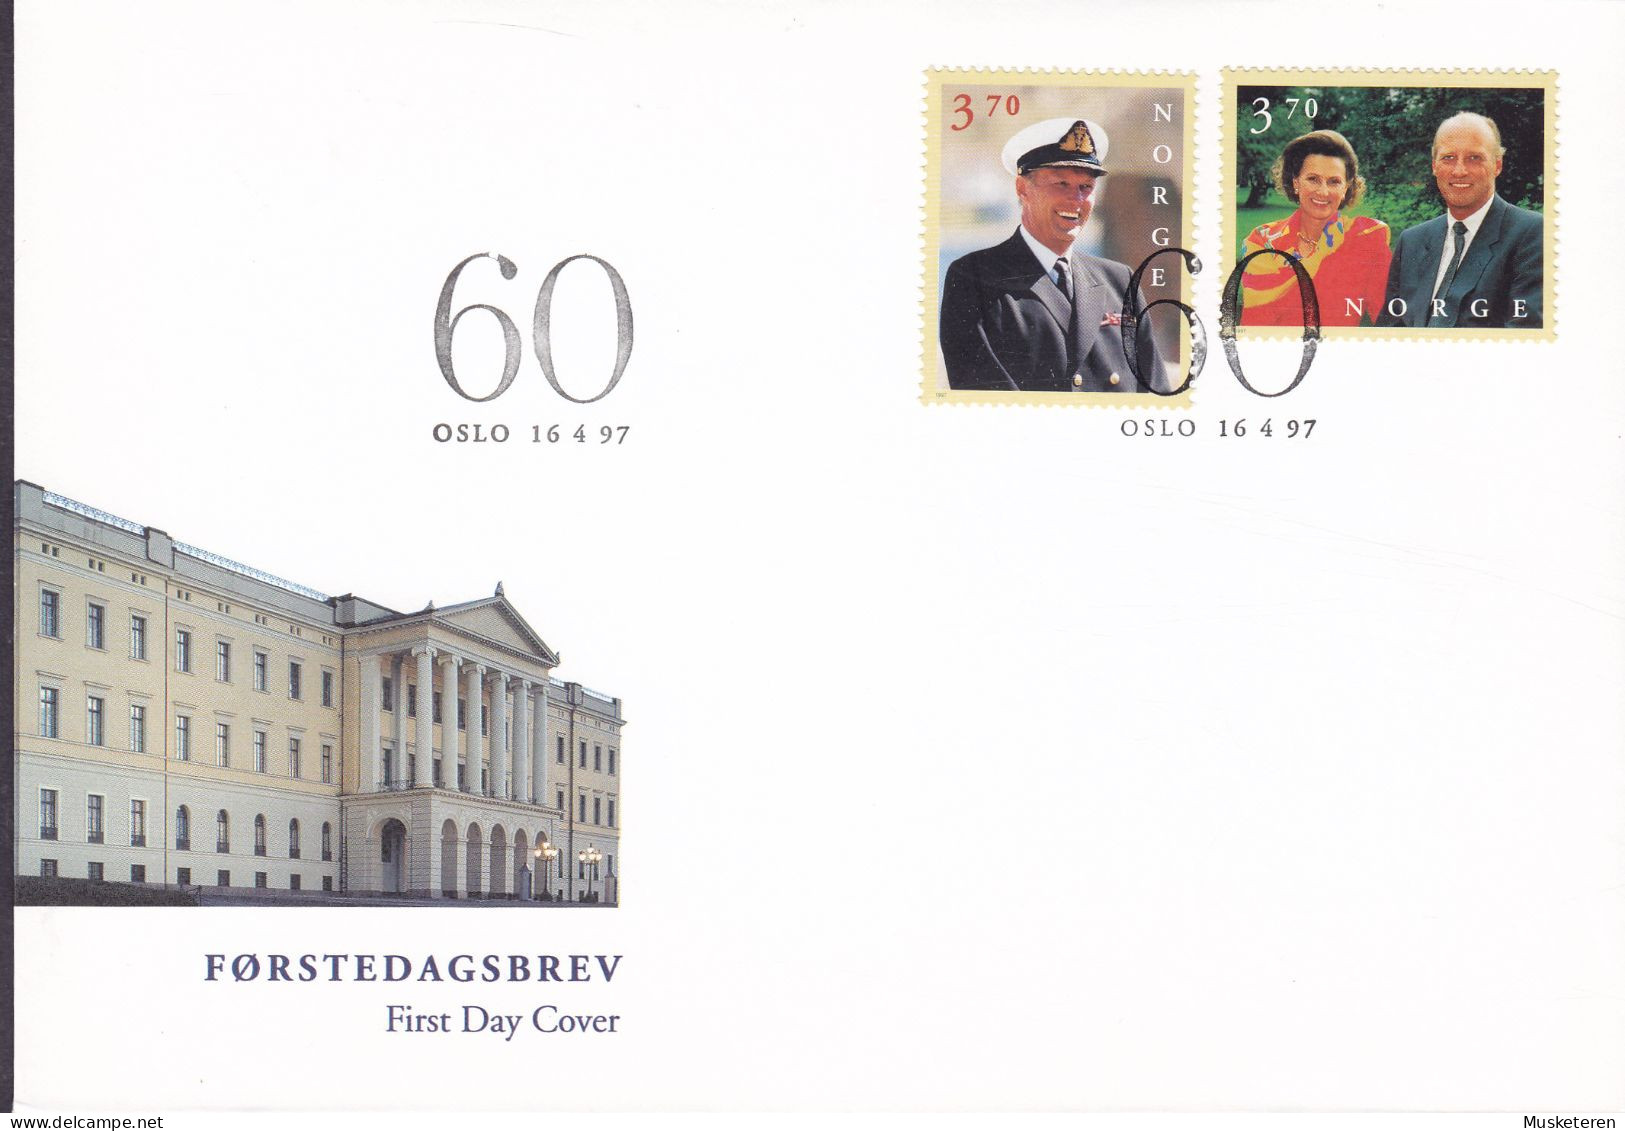 Norway 1997 FDC Cover Ersttags Brief 60. Geburtstag Harald V. & Sonja Complete Set !! - FDC